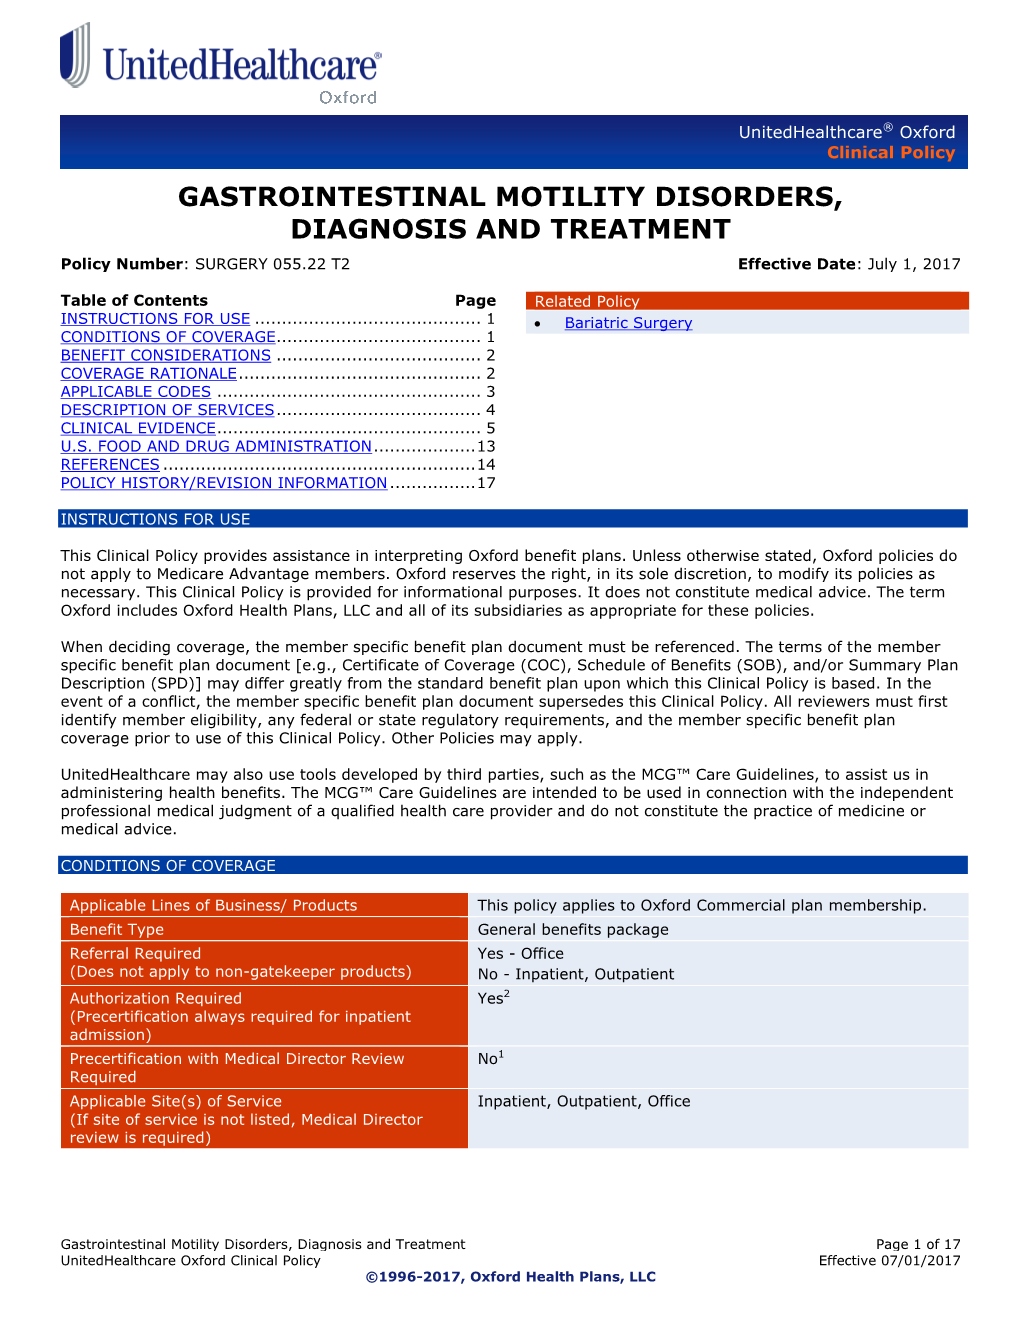 GASTROINTESTINAL MOTILITY DISORDERS, DIAGNOSIS and TREATMENT Policy Number: SURGERY 055.22 T2 Effective Date: July 1, 2017